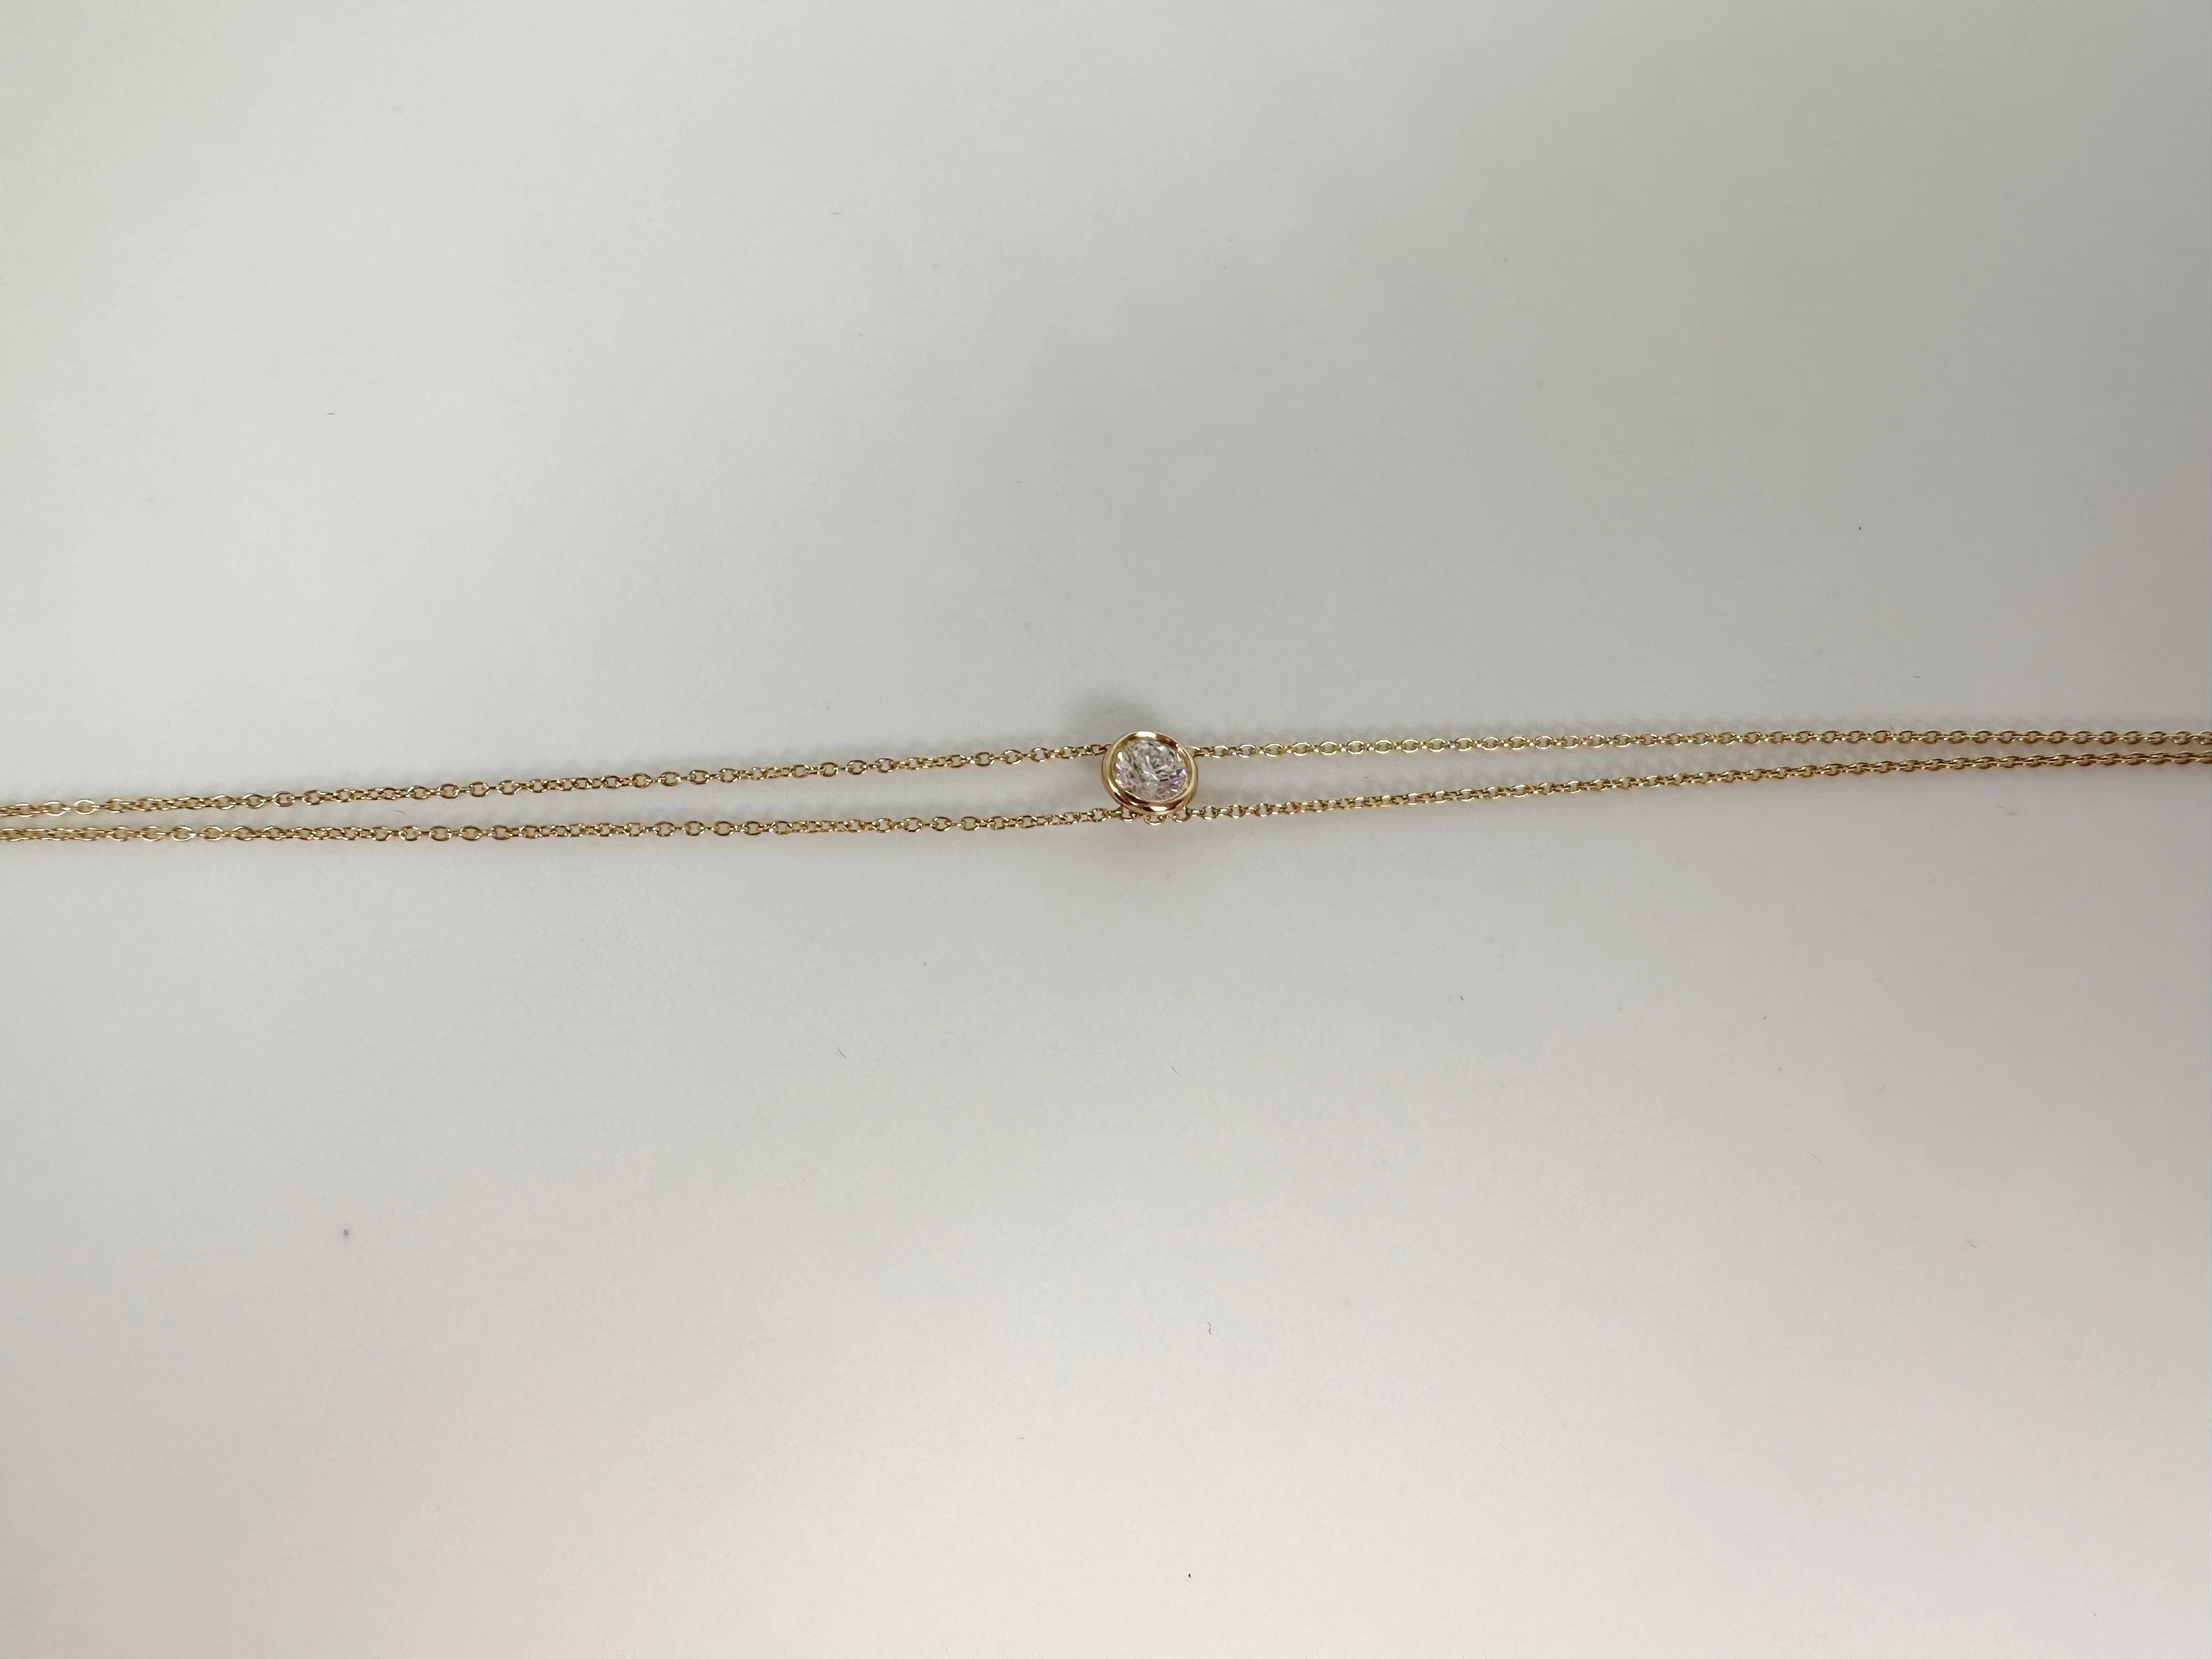 Cute chain bracelet in 14KT yellow gold with a small natural diamond 0.20ct set in bezel.

GOLD: 14KT gold
NATURAL DIAMOND(S)
Clarity/Color: SI/G
Carat:0.20ct
Cut:Round Brilliant
Grams:0.95ct
size:6.75